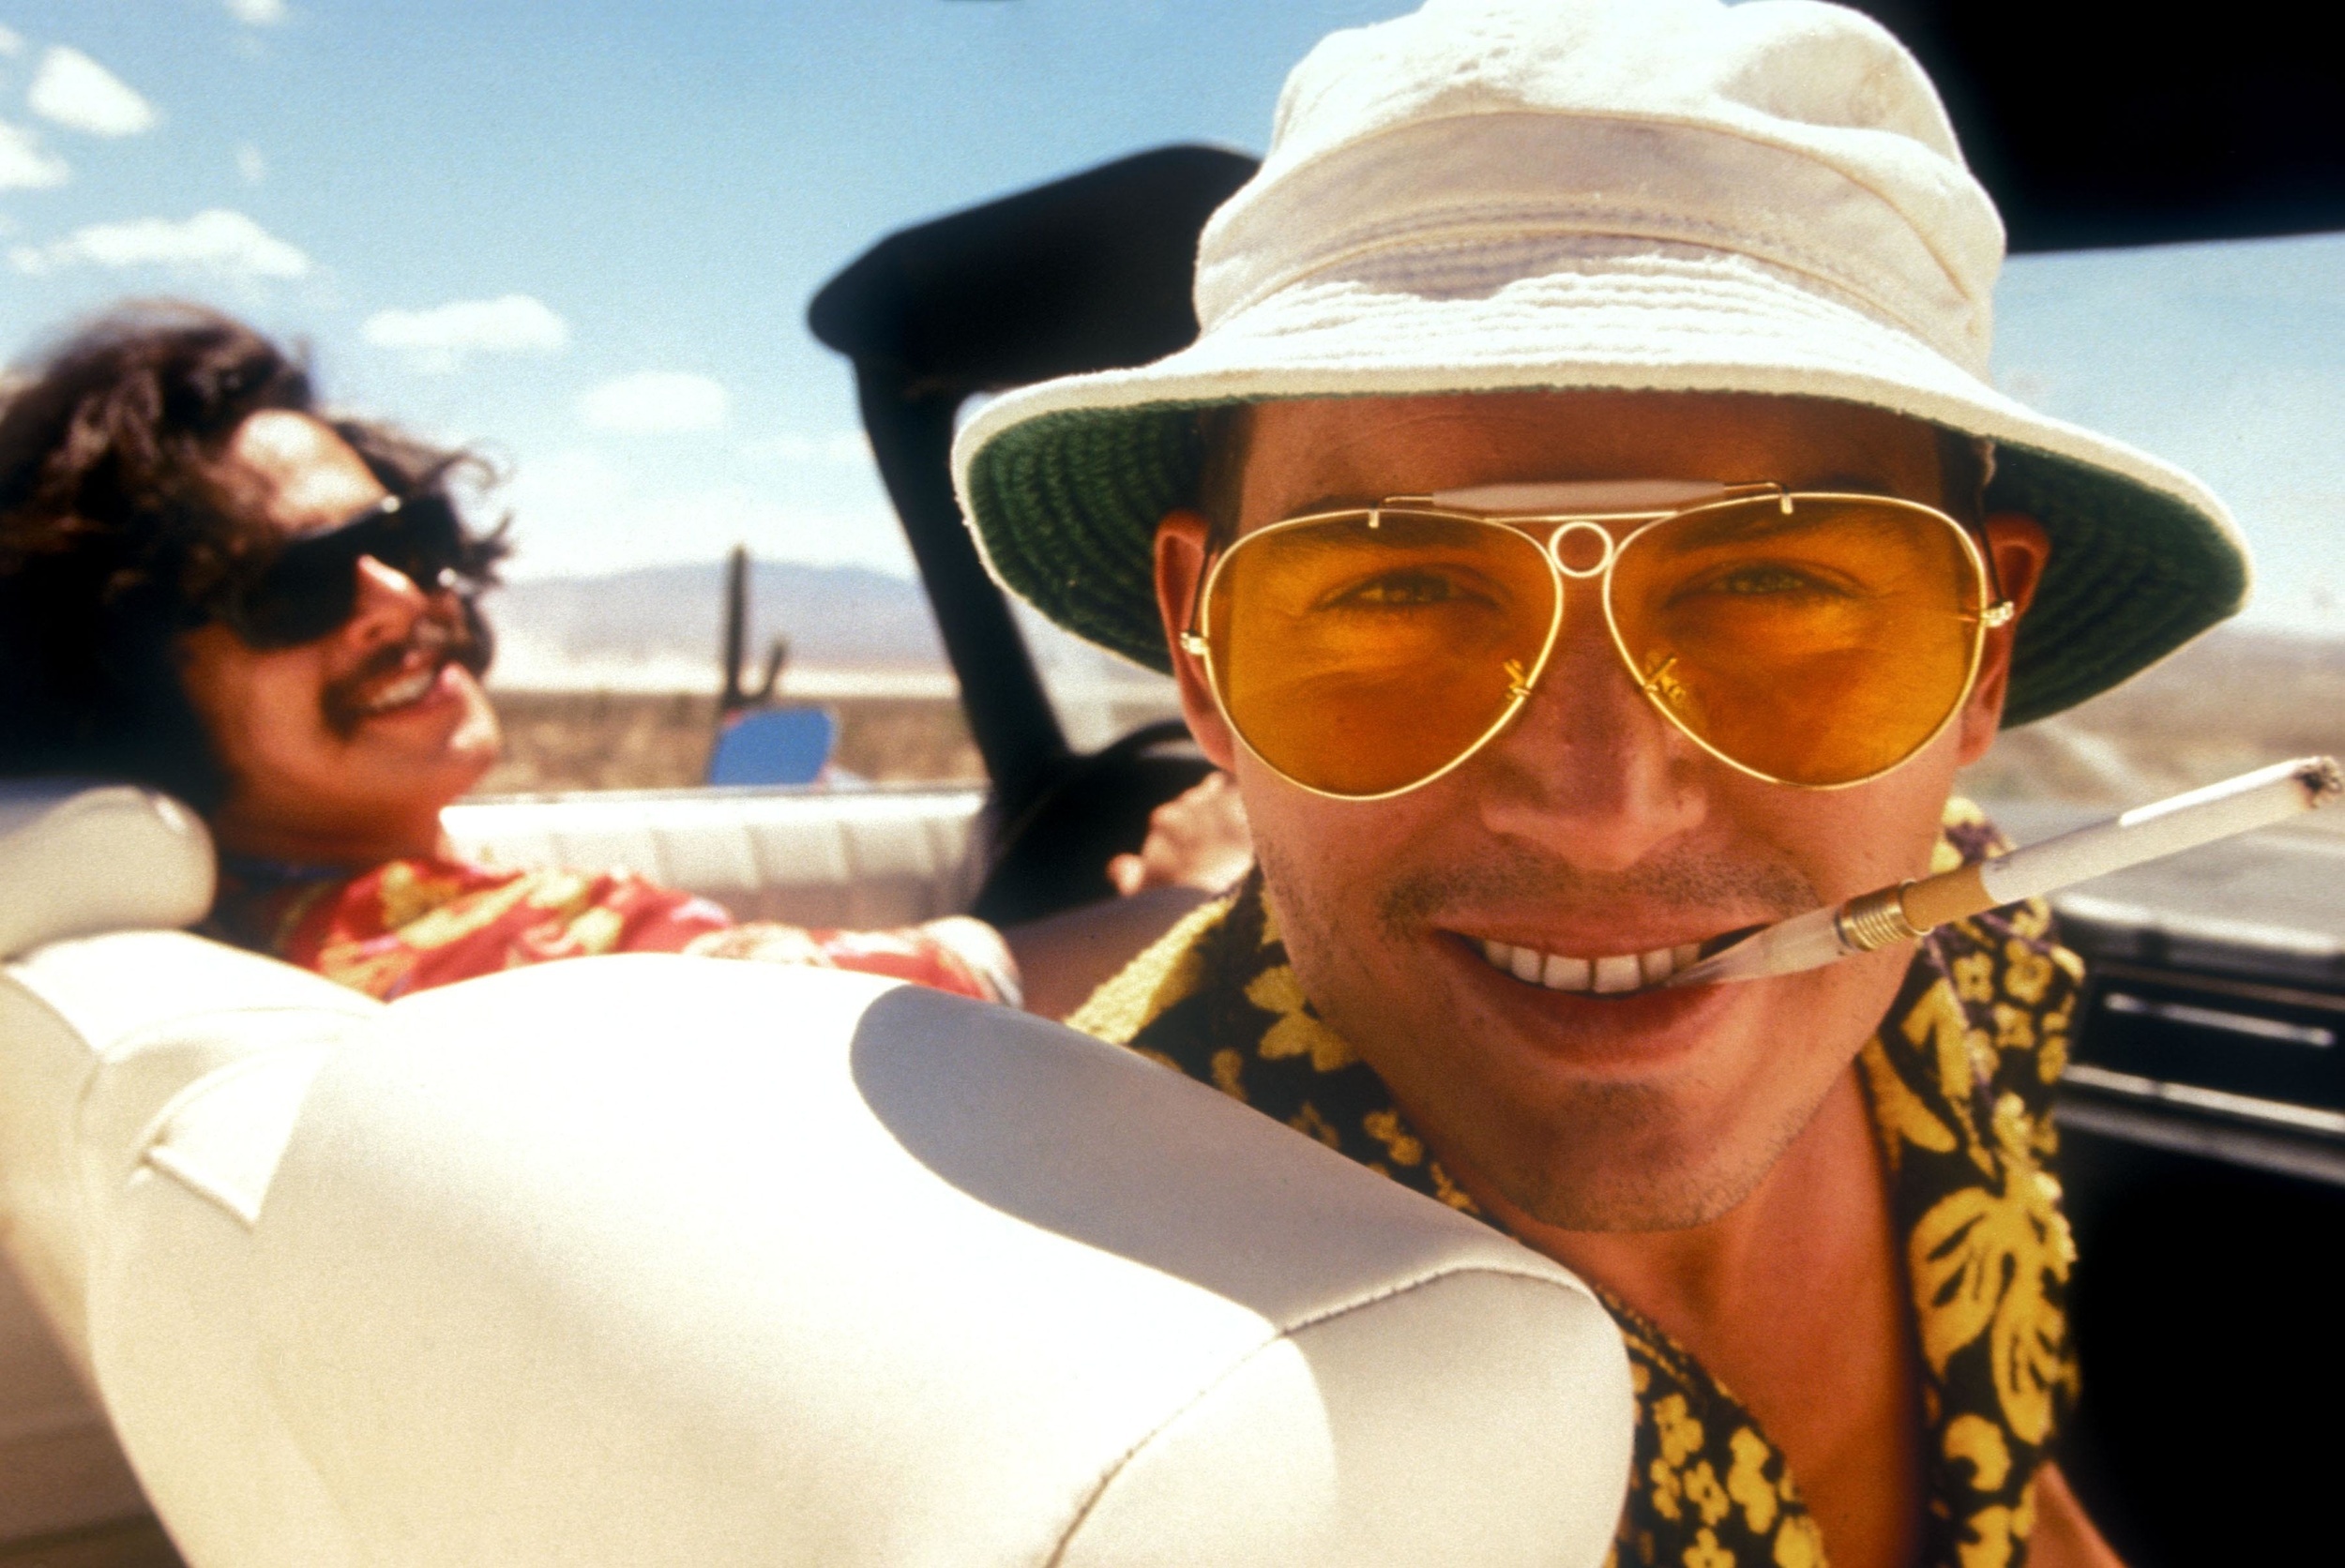 <p>In these modern times, a film starring Johnny Depp and directed by Terry Gilliam is perhaps not going to be remembered as fondly, and <em>Fear and Loathing in Las Vegas</em> has always been more of a cult movie anyway. It hooks you in with the first line, effectively a statement of purpose: “We were somewhere around Barstow, on the edge of the desert, when the drugs began to take hold.”</p><p>You may also like: <a href='https://www.yardbarker.com/entertainment/articles/beloved_movies_from_the_1970s_that_still_hold_up_today_122723/s1__32912261'>Beloved movies from the 1970s that still hold up today</a></p>